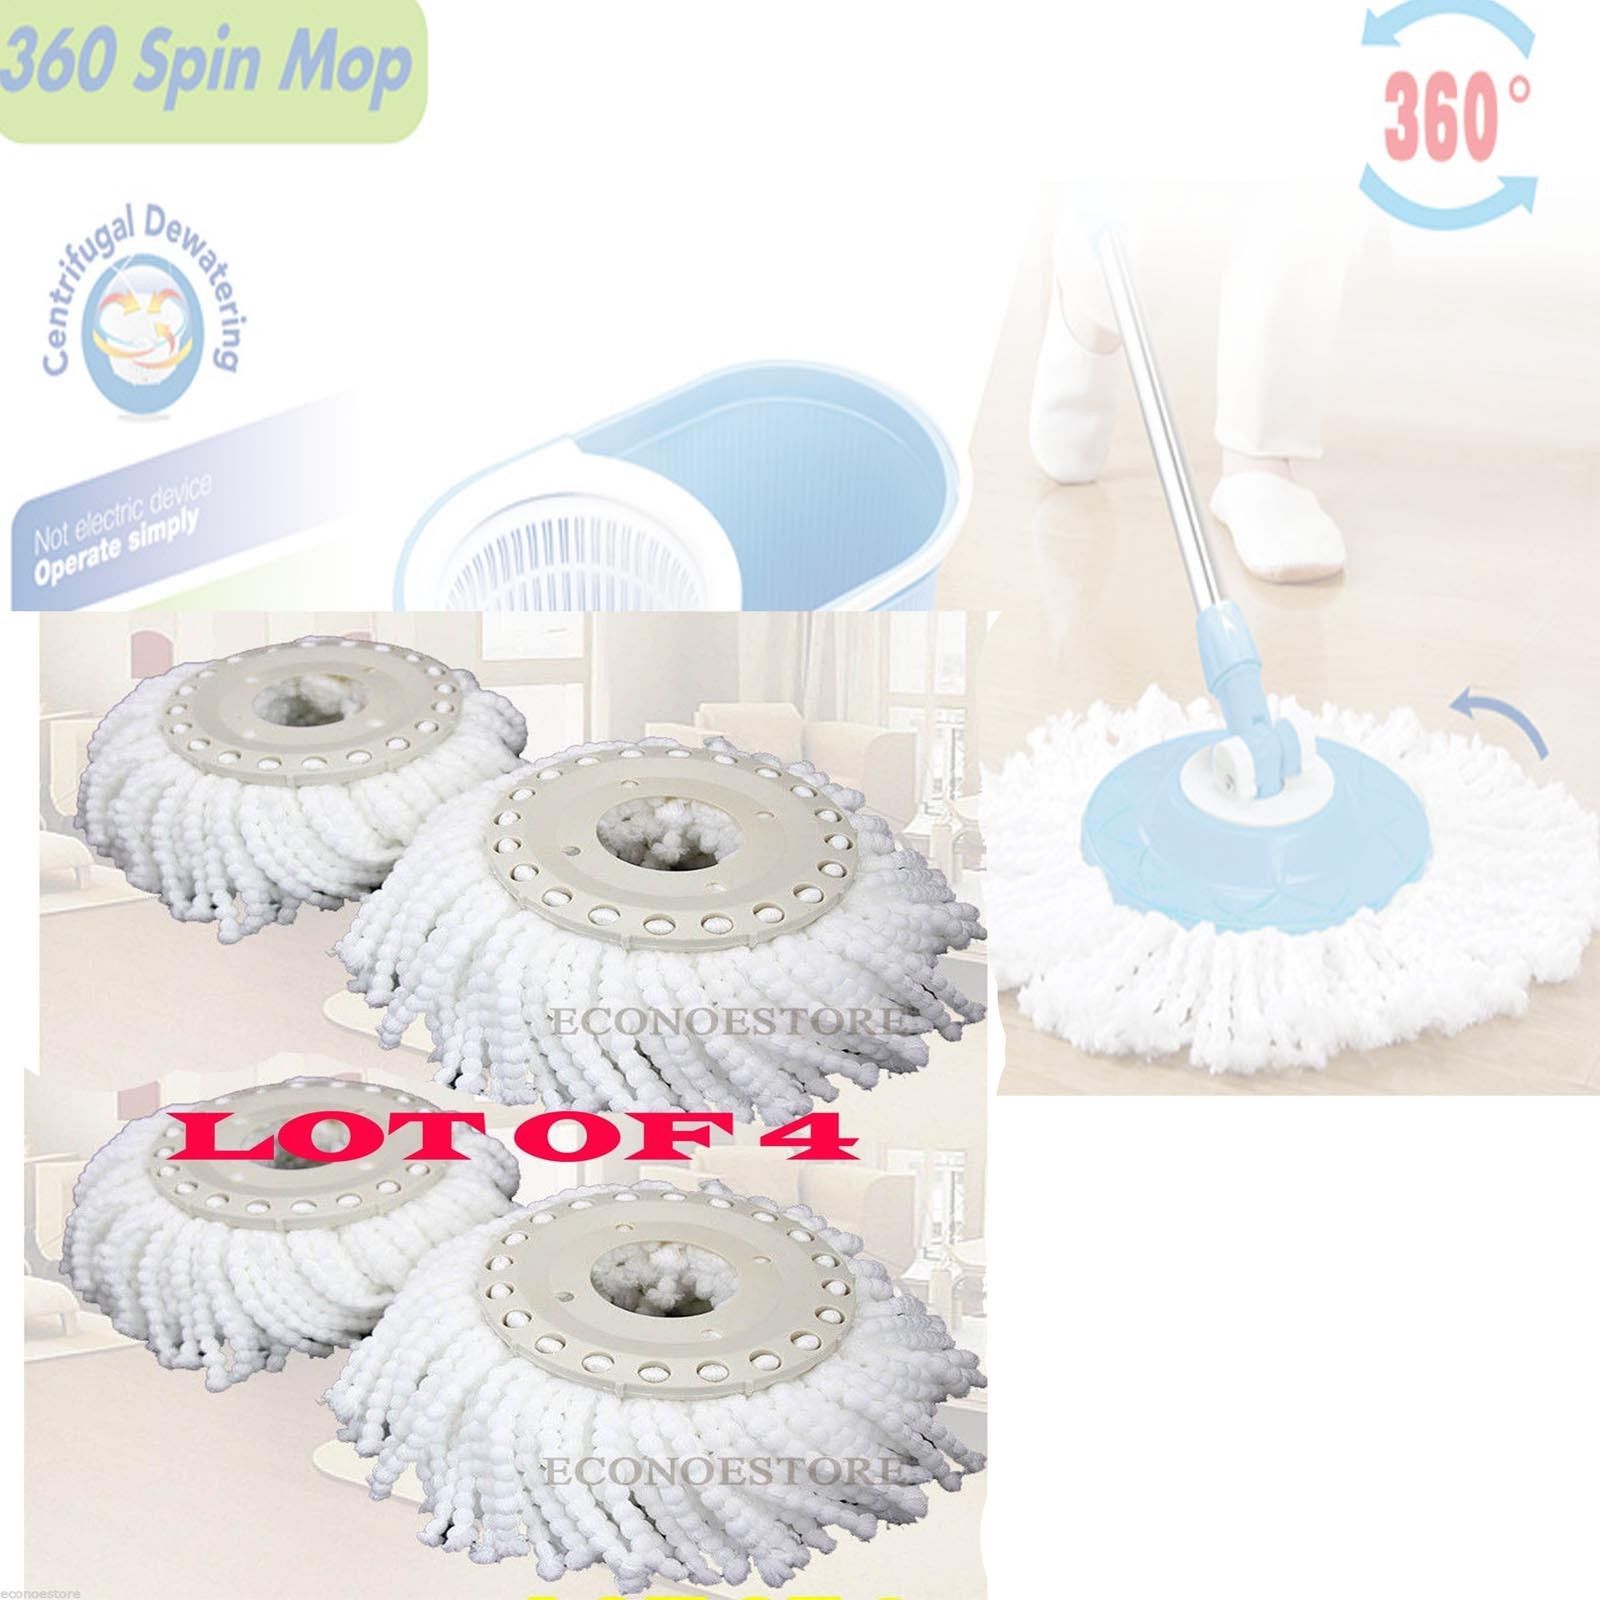 Lot of 4 Microfiber Mop Head Refill Replacement for Magic Mop 360° Spin 